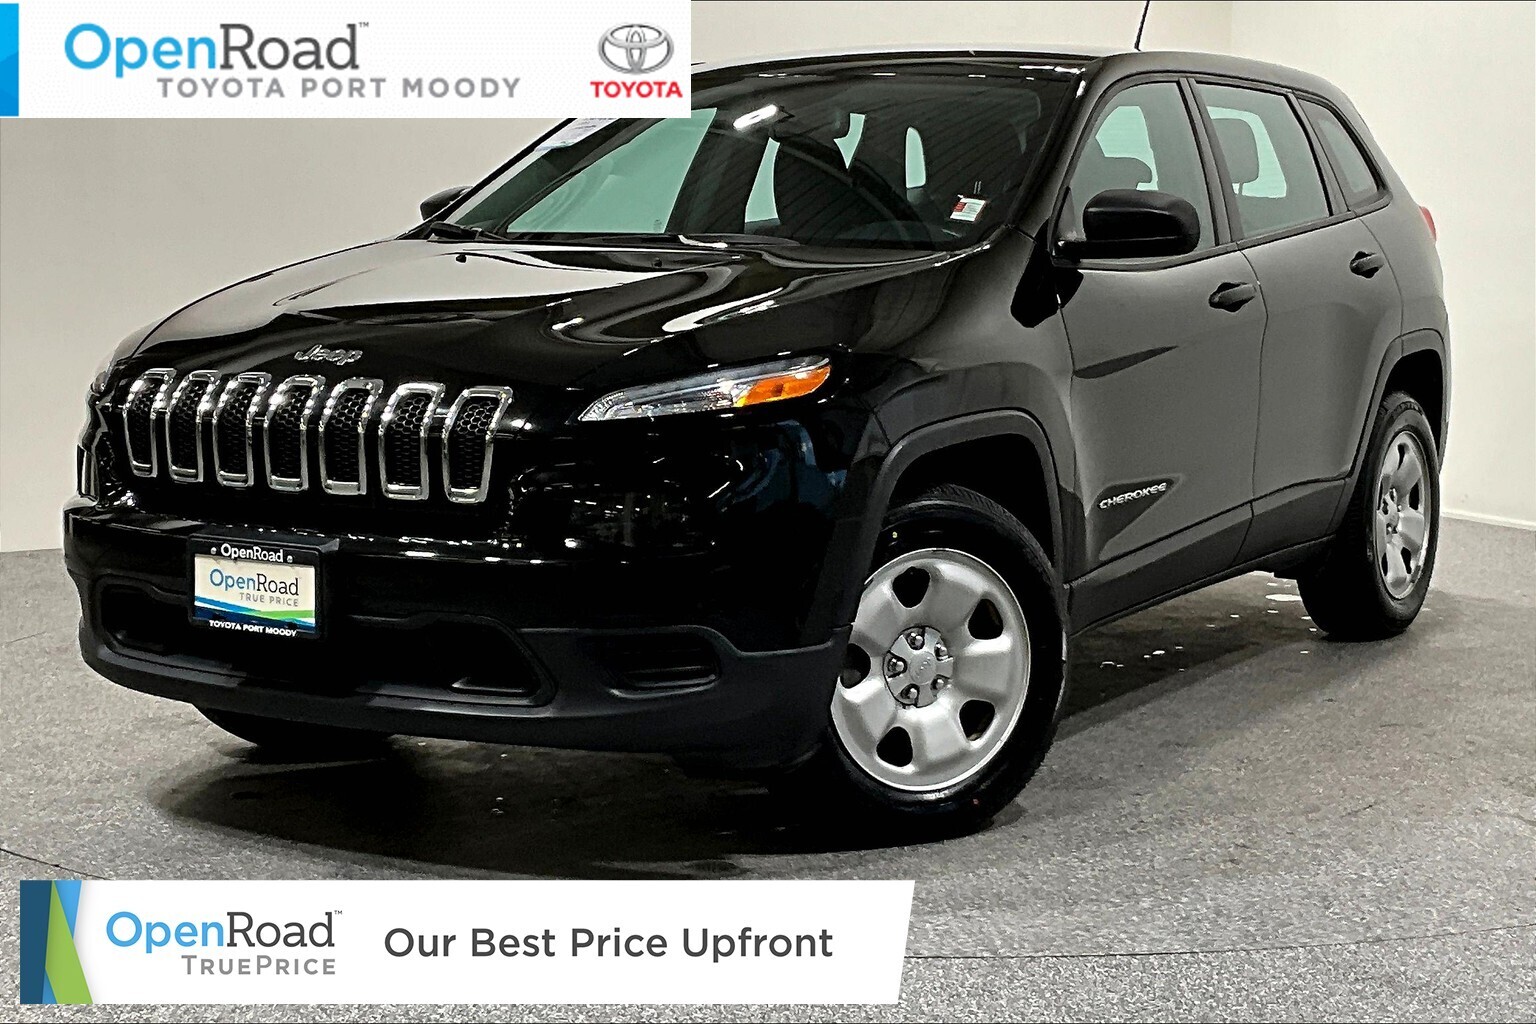 2017 Jeep Cherokee 4x4 Sport |OpenRoad True Price |Local |One Owner |